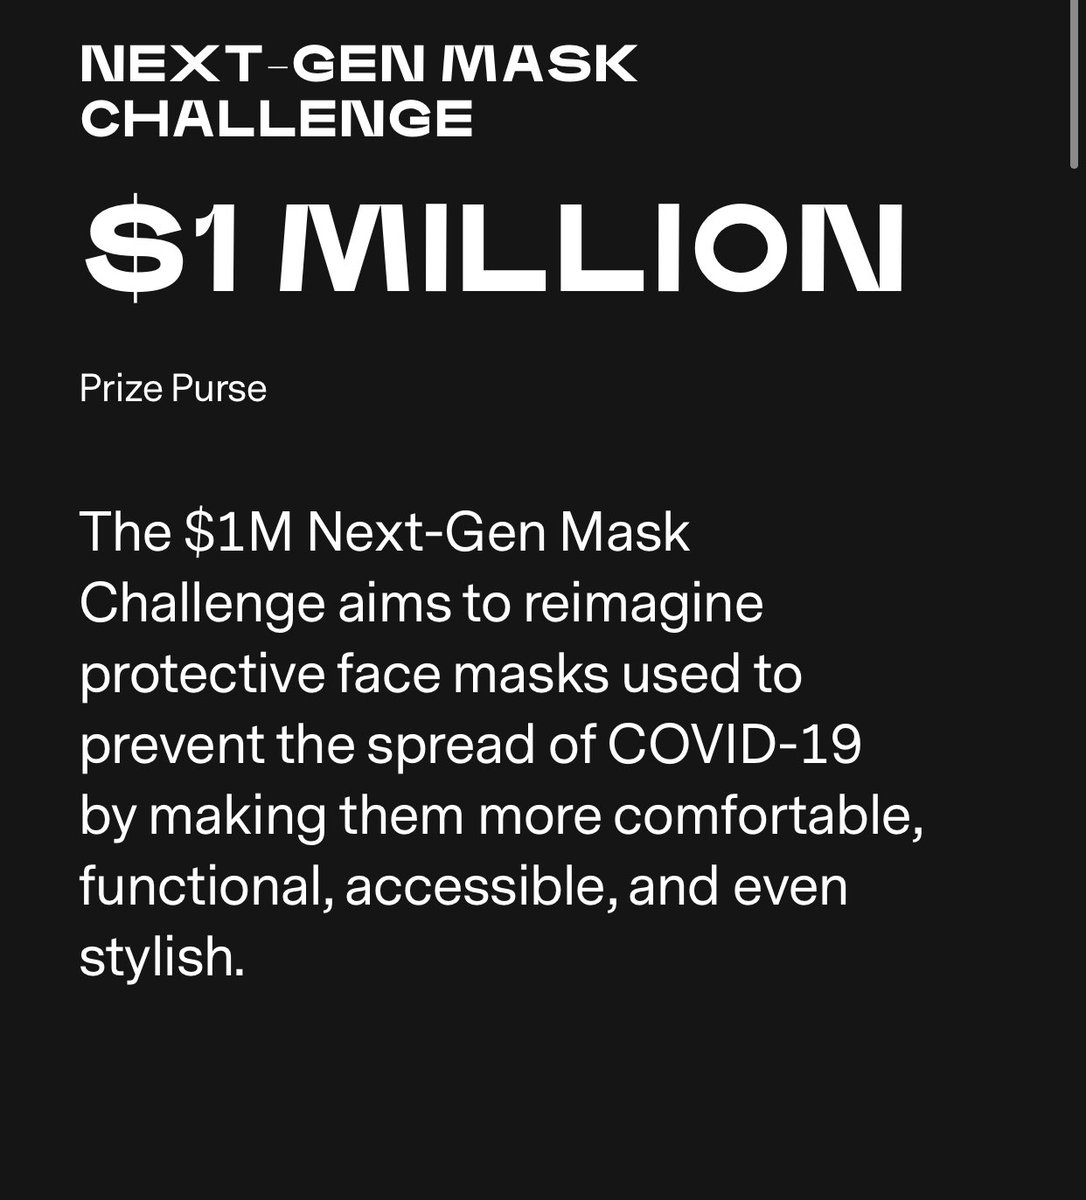 13.5/ Other private efforts have also been underway like  @xprize awarded to  @LuminosityLab  @ASU which is a group of college/grad students that designed the “Floemask” which builds on existing surgical mask designs  @getusppe  #covid19